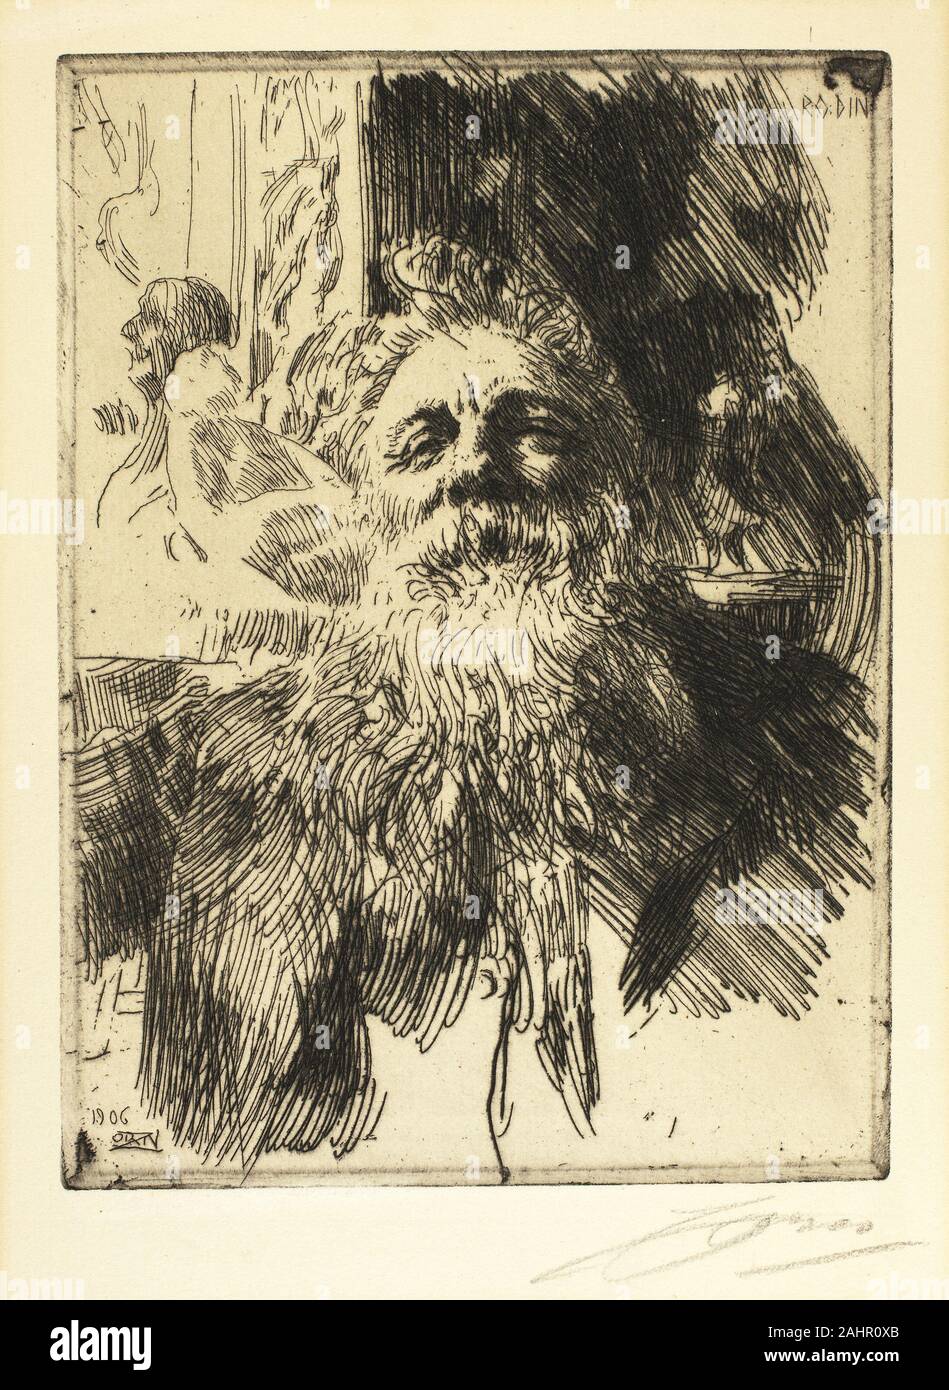 Anders Zorn. Auguste Rodin. 1906. Sweden. Etching in black on ivory laid paper Stock Photo